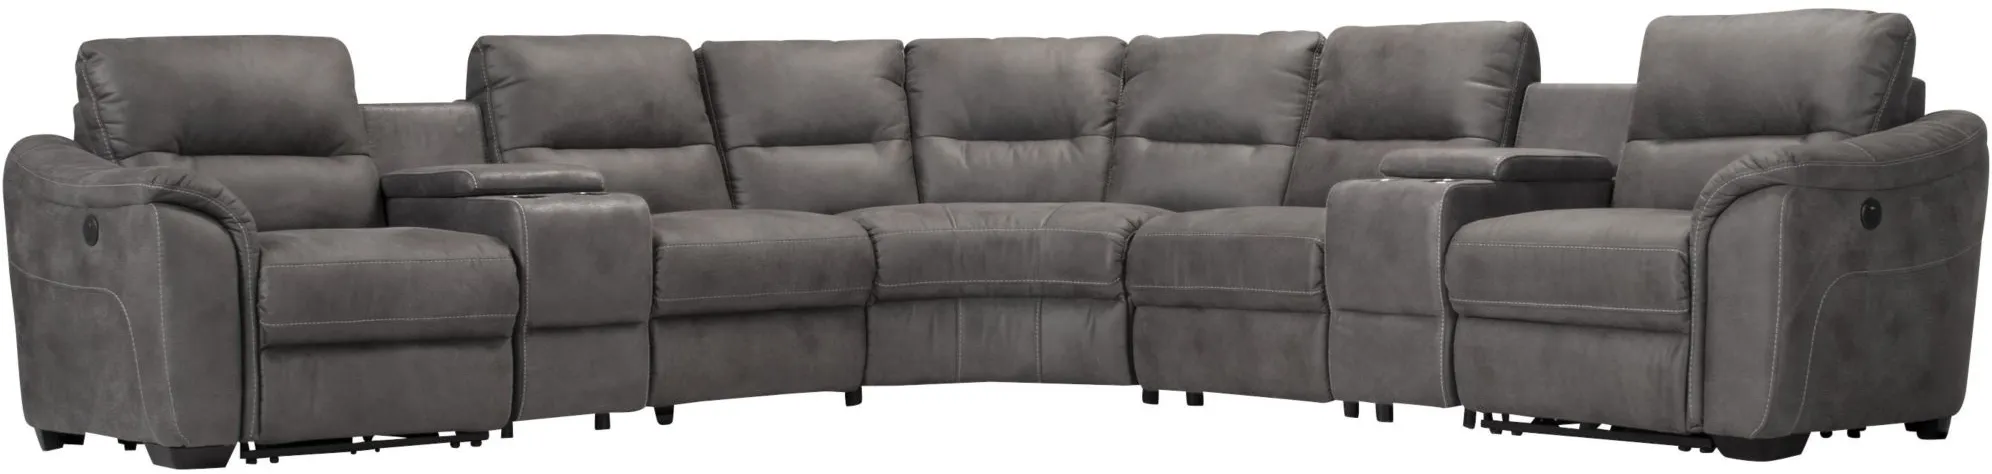 Rockland Microfiber 7-pc. Power Sectional in Gray by Bellanest